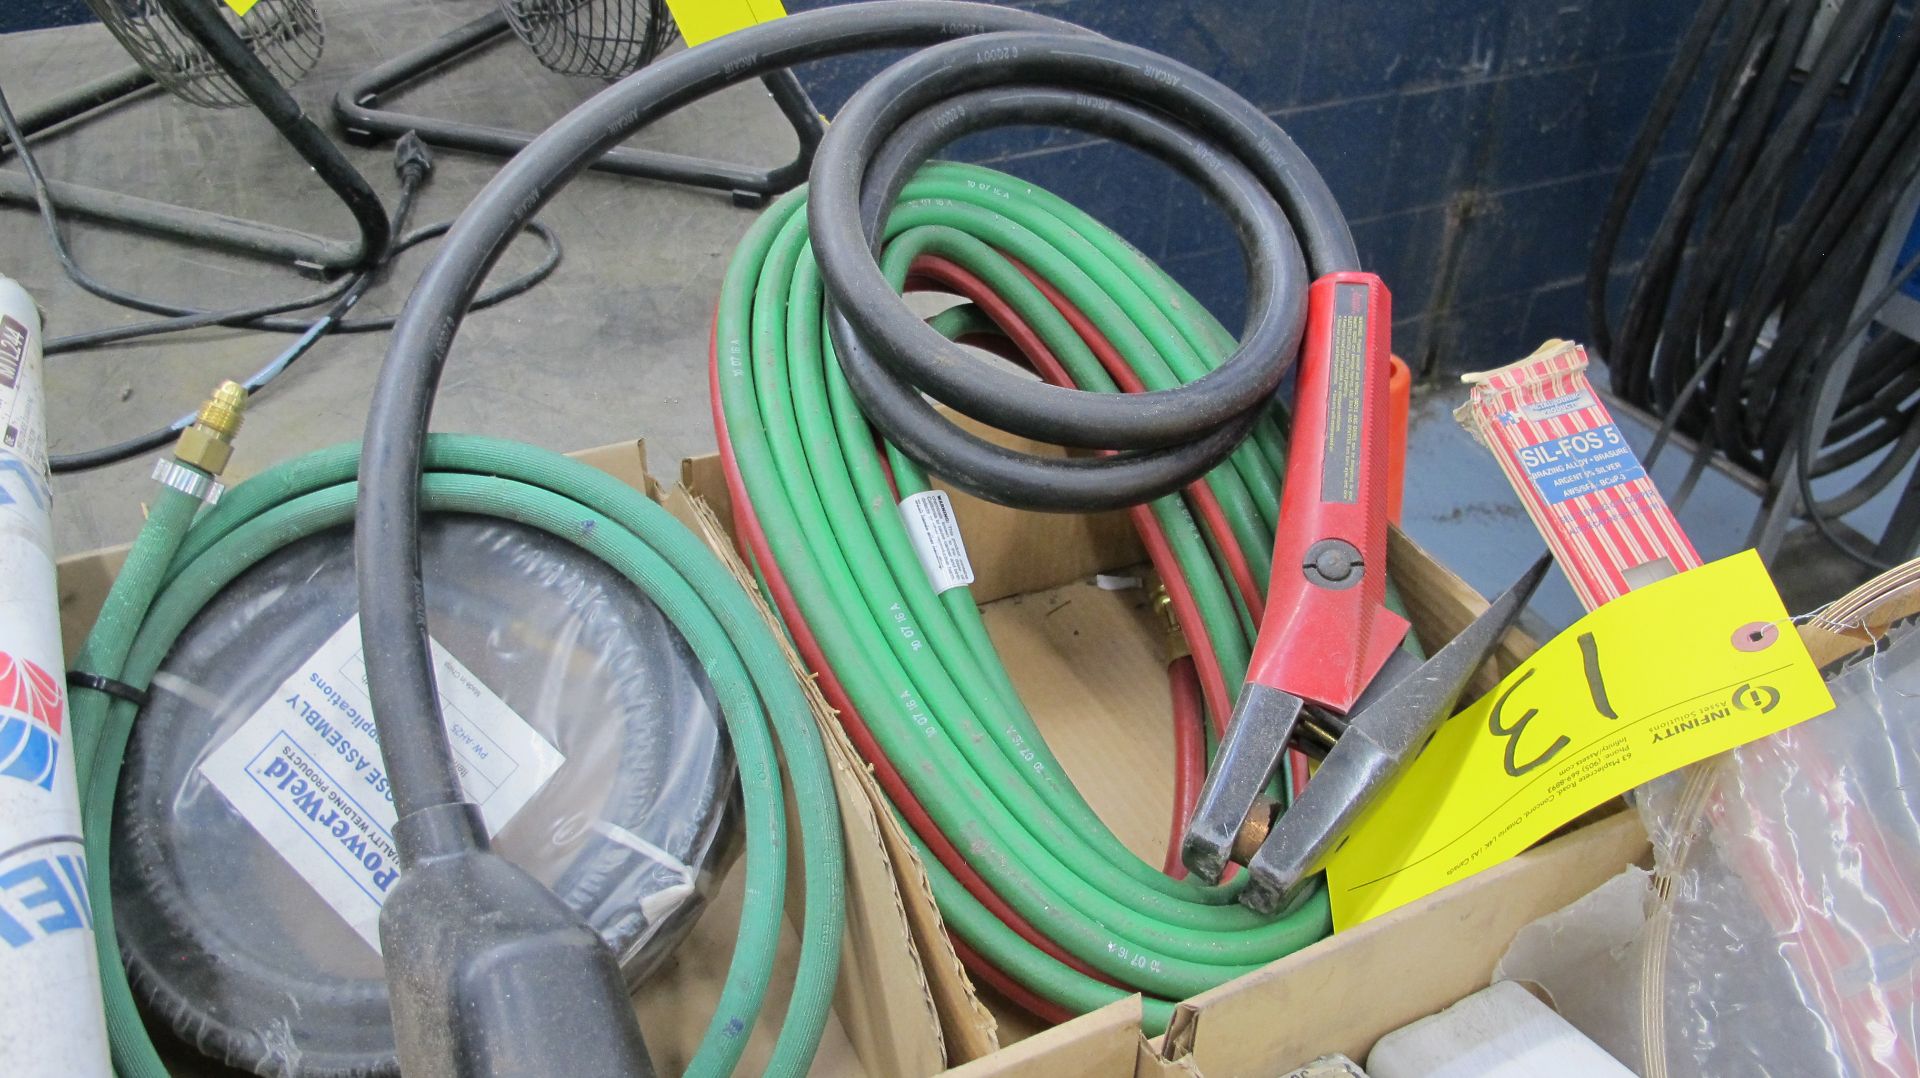 LOT OF WELDING SUPPLIES IN (11) BOXES INCLUDING SODEL 469B-250 SILVERY ALLOY BARE WIRE, CABLES, - Image 3 of 8